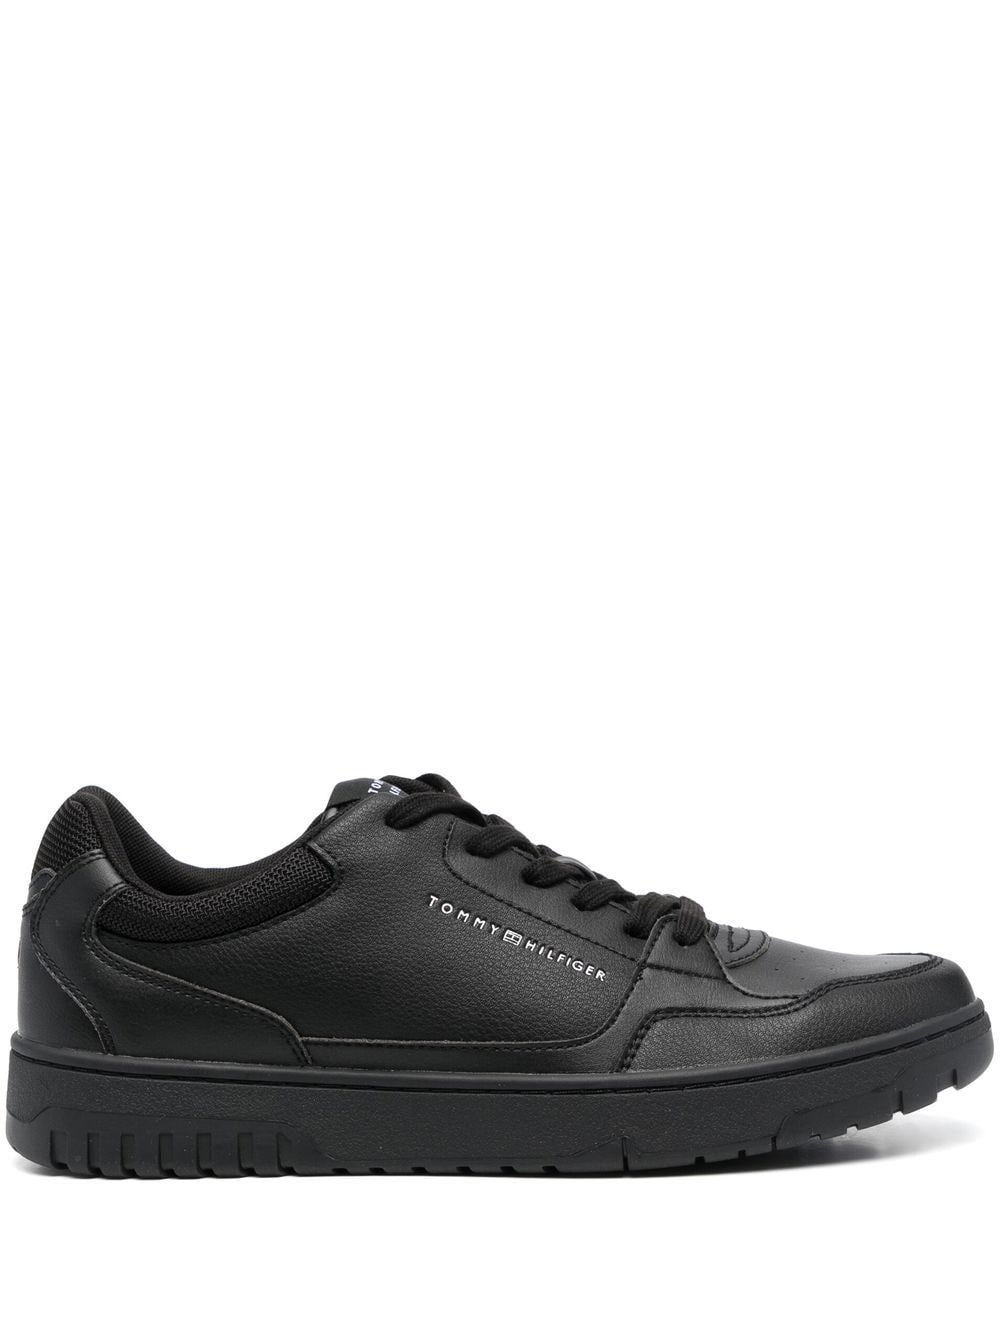 Hilfiger Low Top Sneakers Farfetch - Tommy lace-up